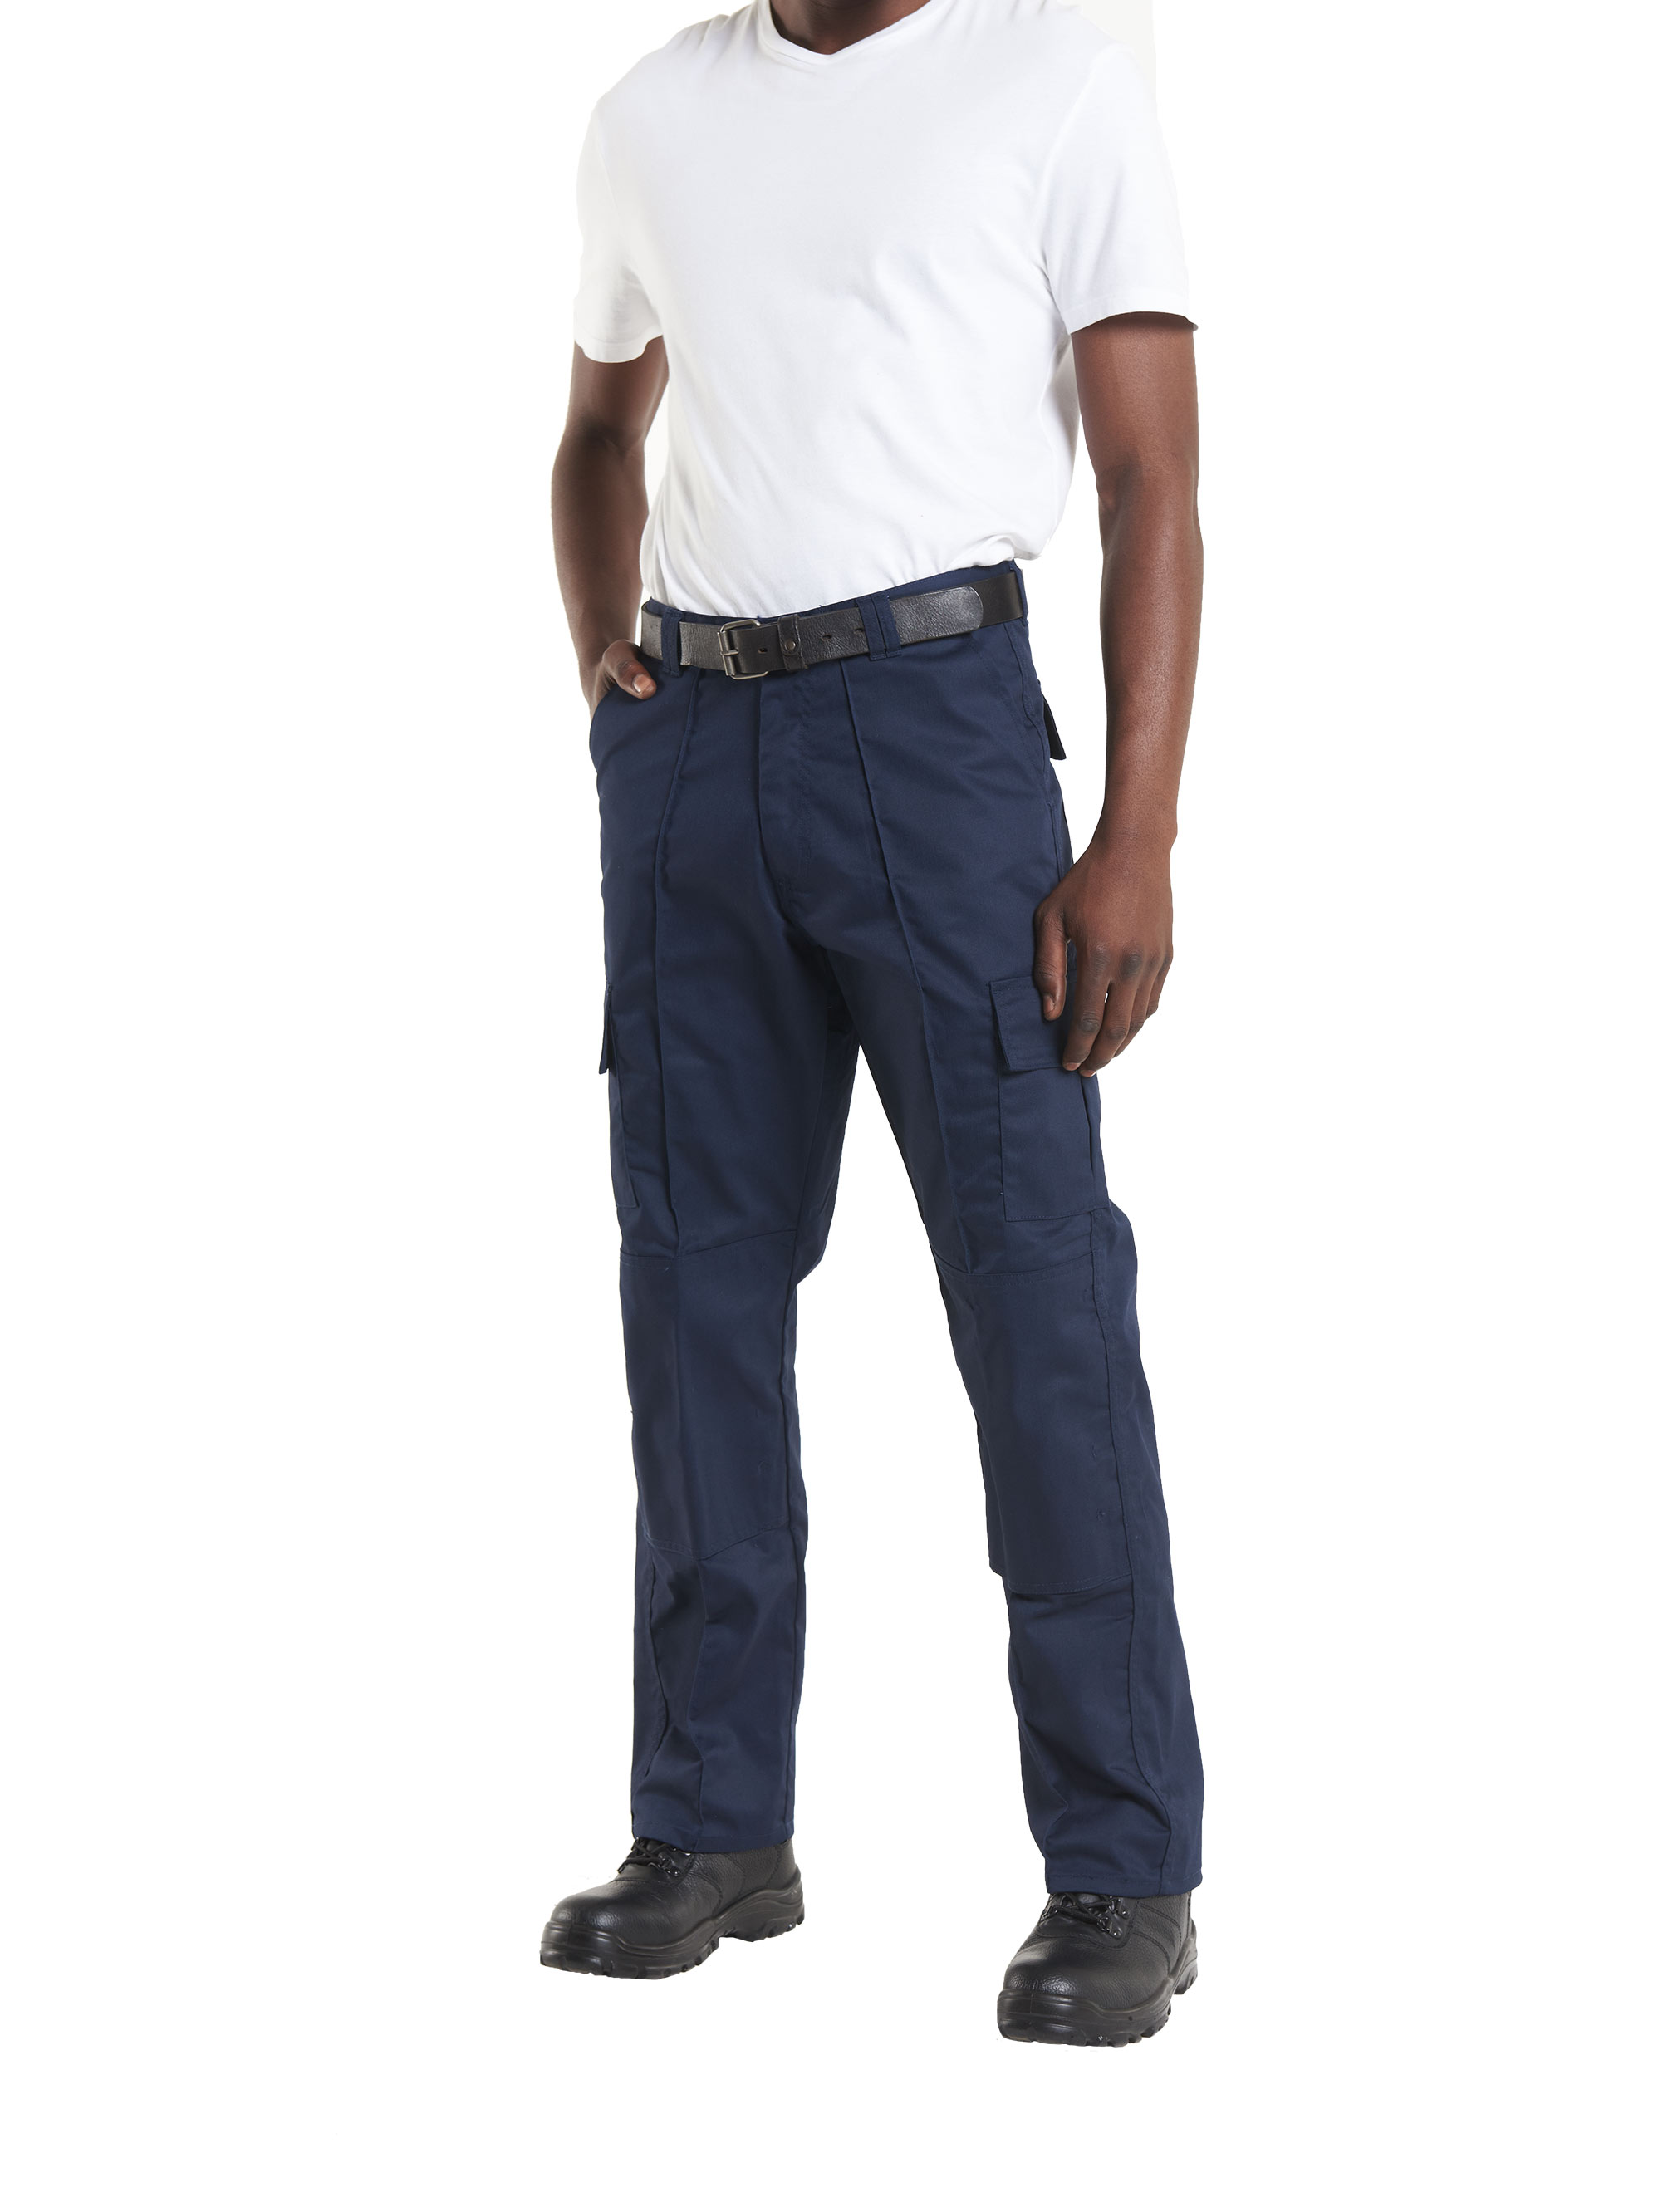 Cargo Trouser Long with Knee Pads